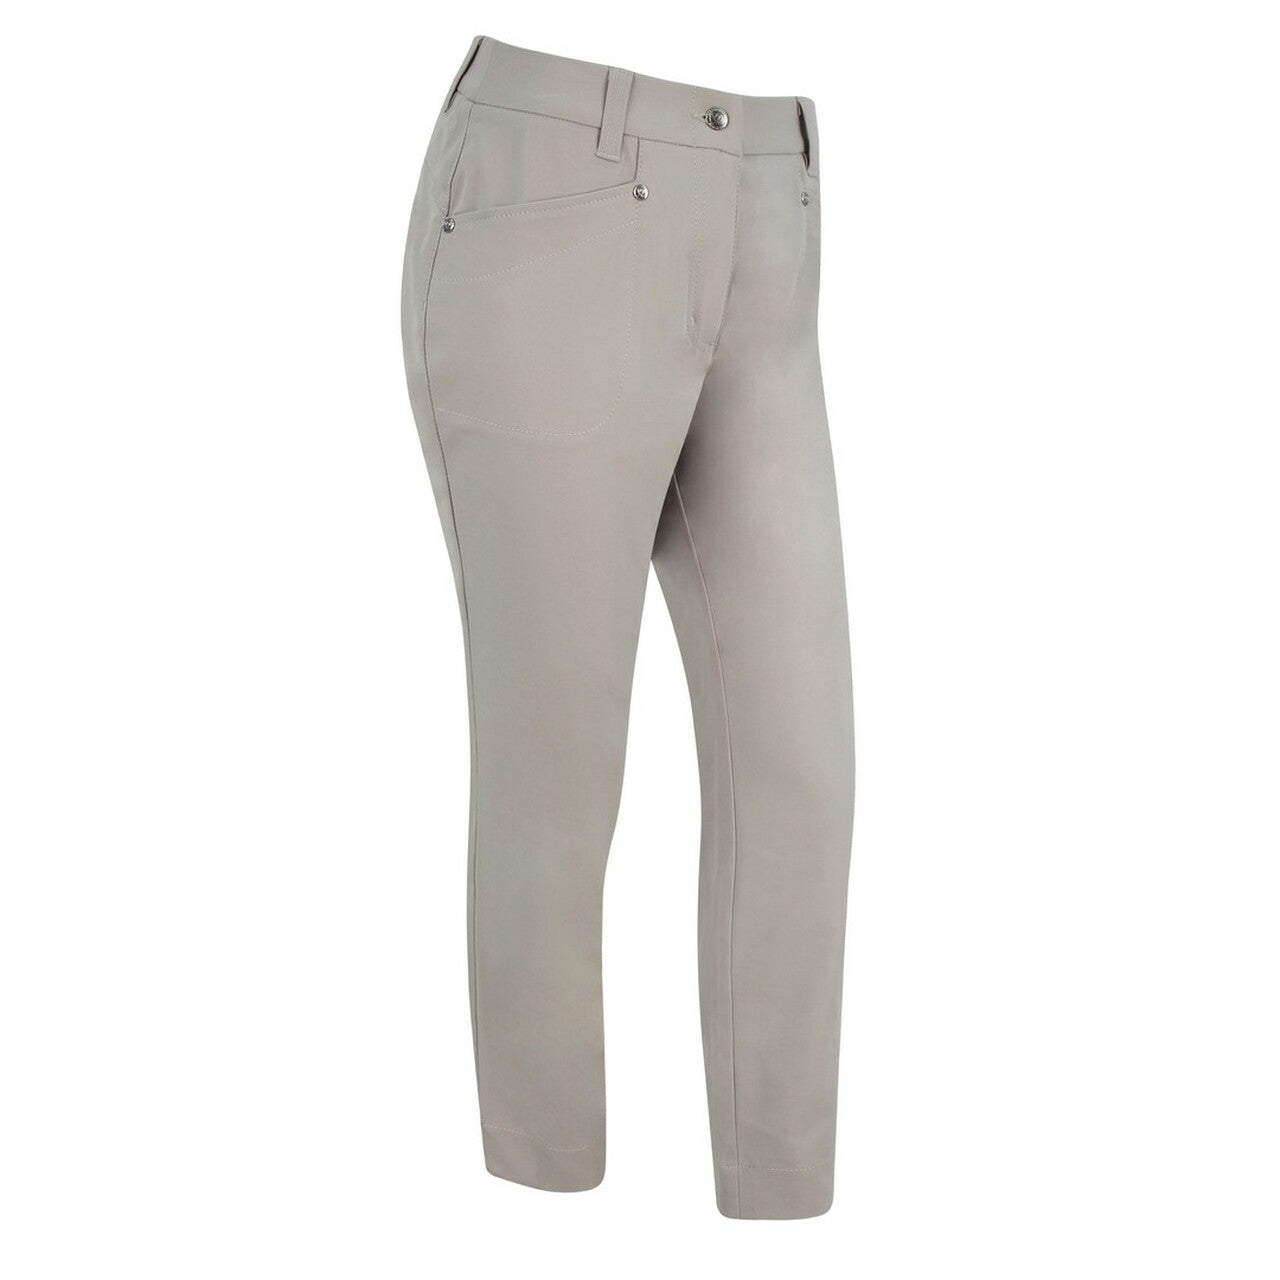 Daily Sports- Lyric HighWater Ankle Pant Sandy Beige (Style#: 183/263/306)